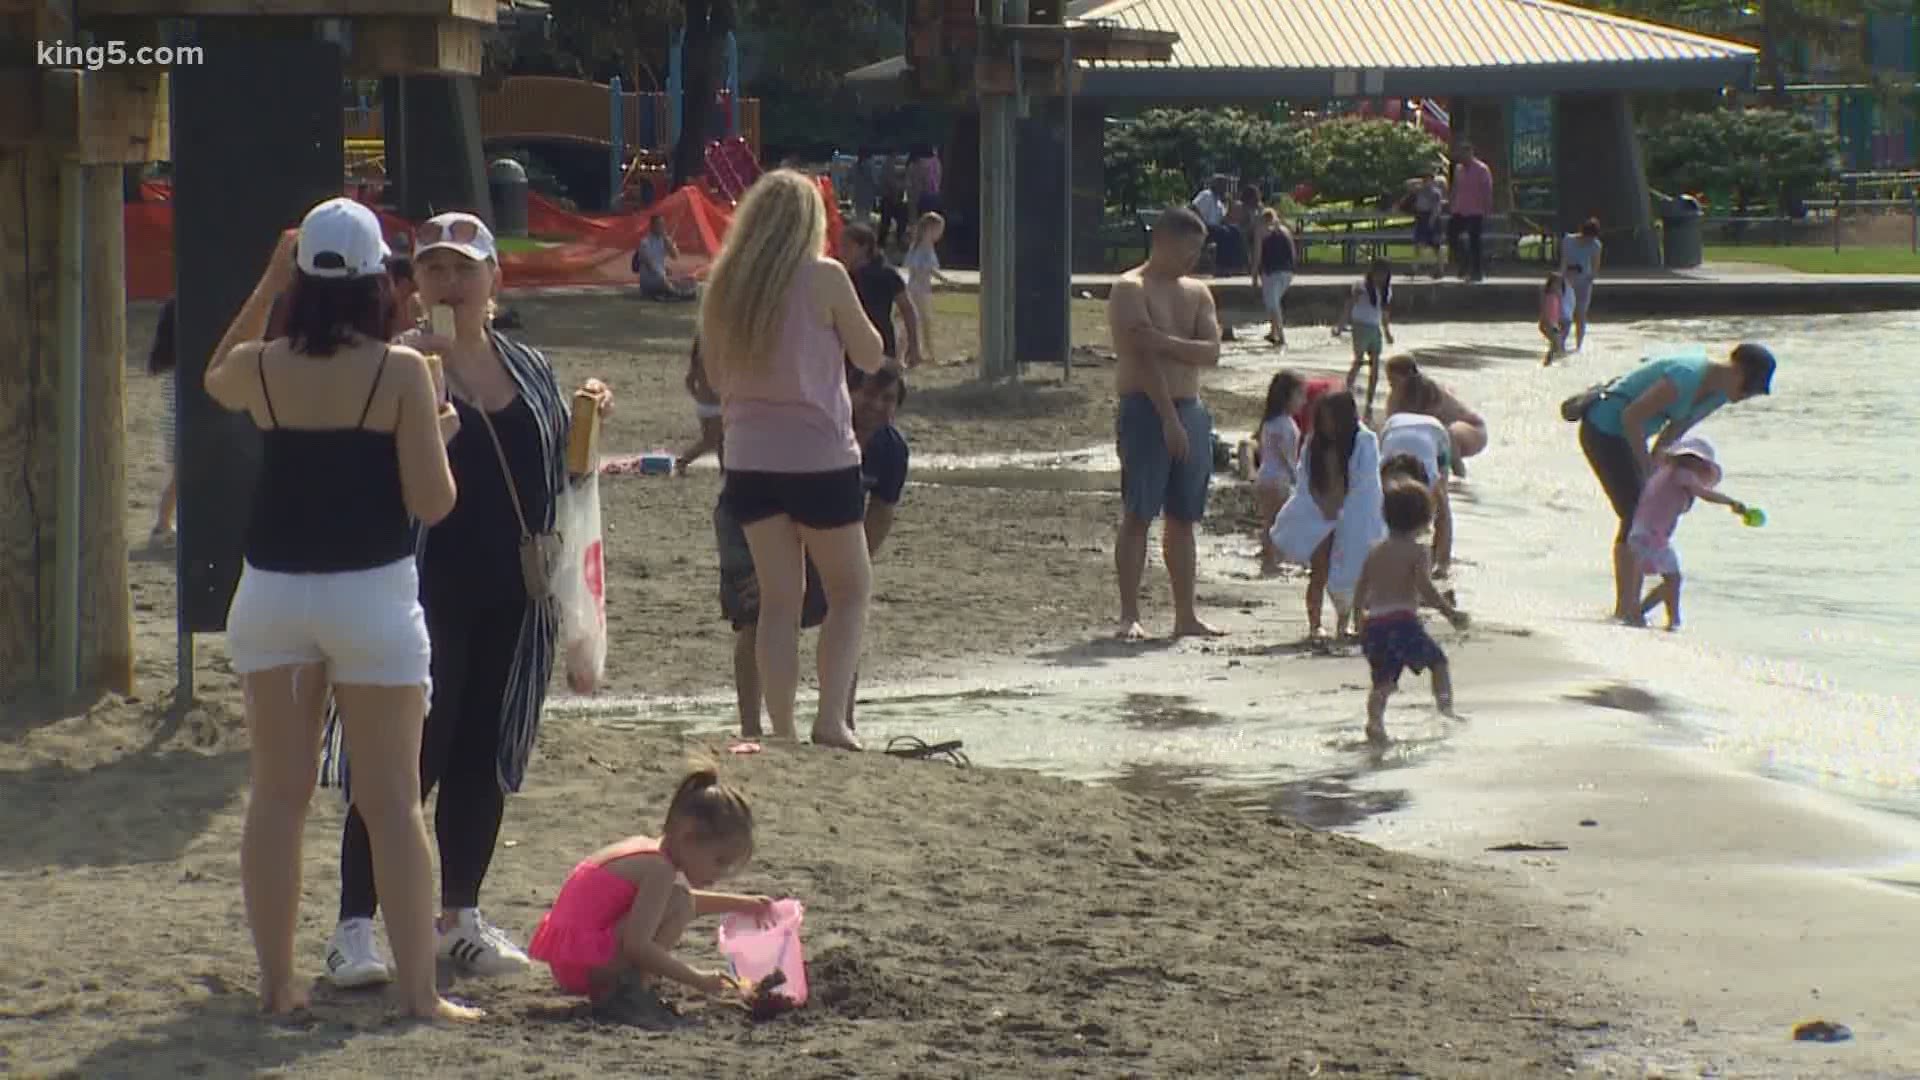 Many people are skipping wearing masks during warm weather.